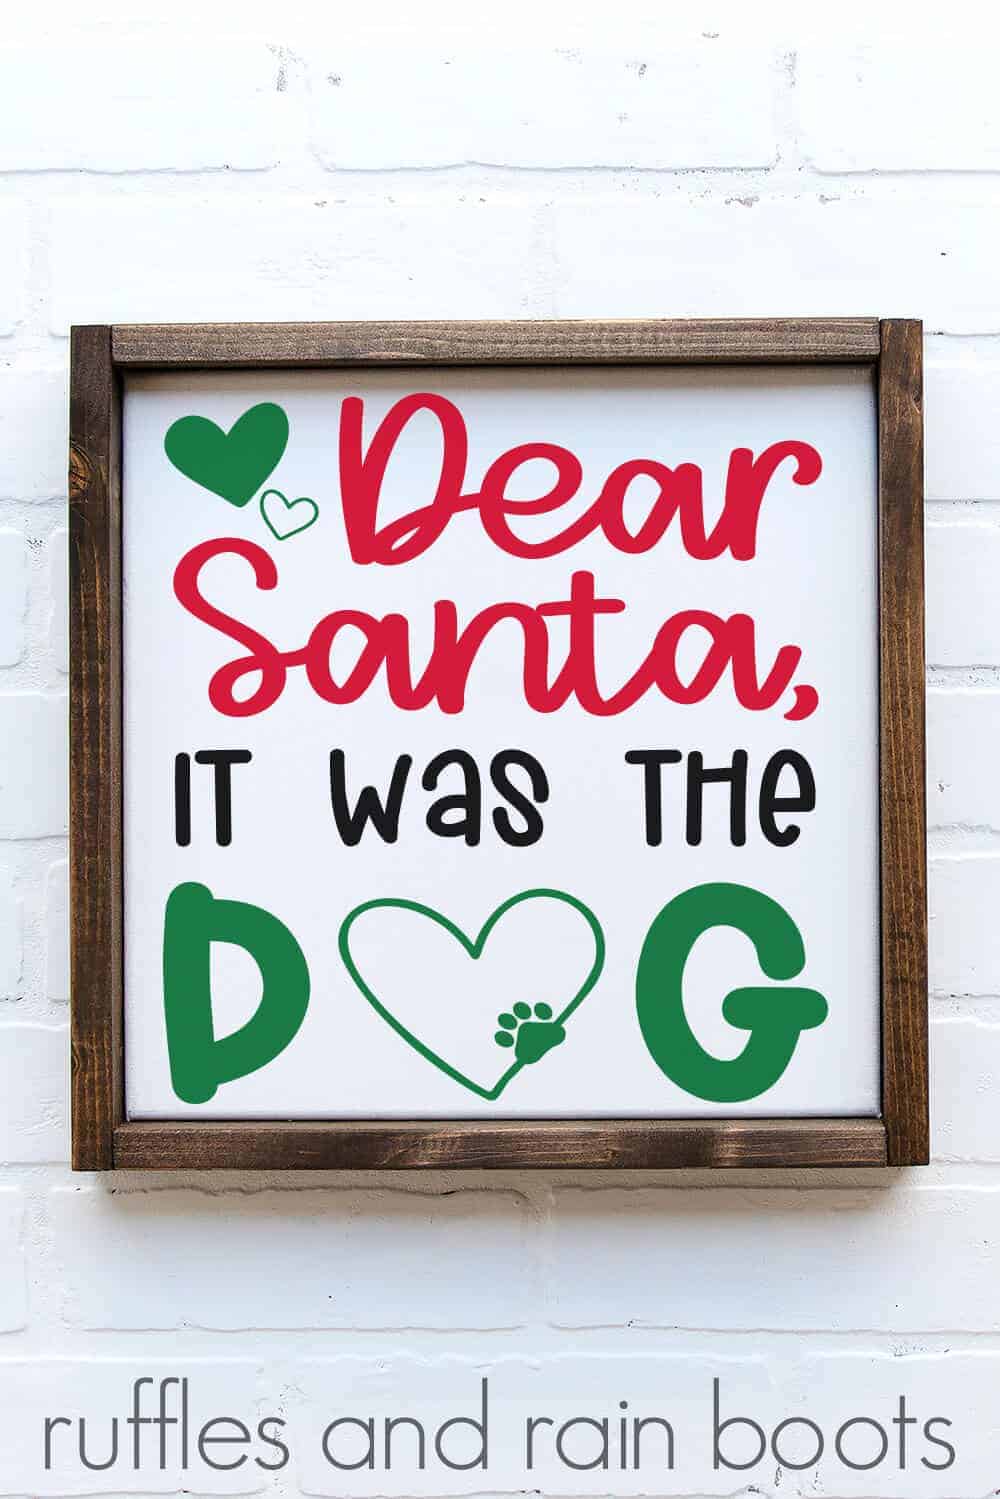 vertical image of white frame on brick background with red green and black design which says Dear Santa It was the dog